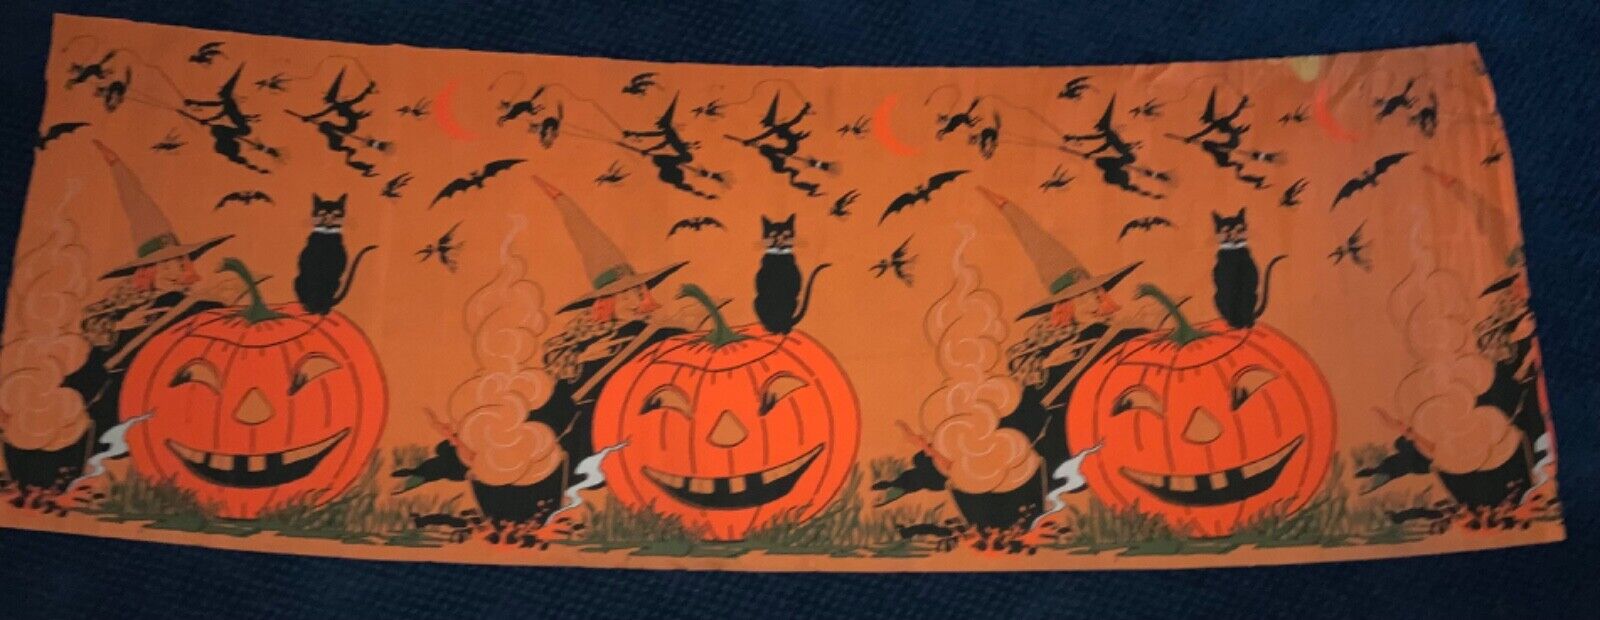 VINTAGE HALLOWEEN CREPE PAPER - WITCHES, BLACK CATS, JACK O’LANTERNS